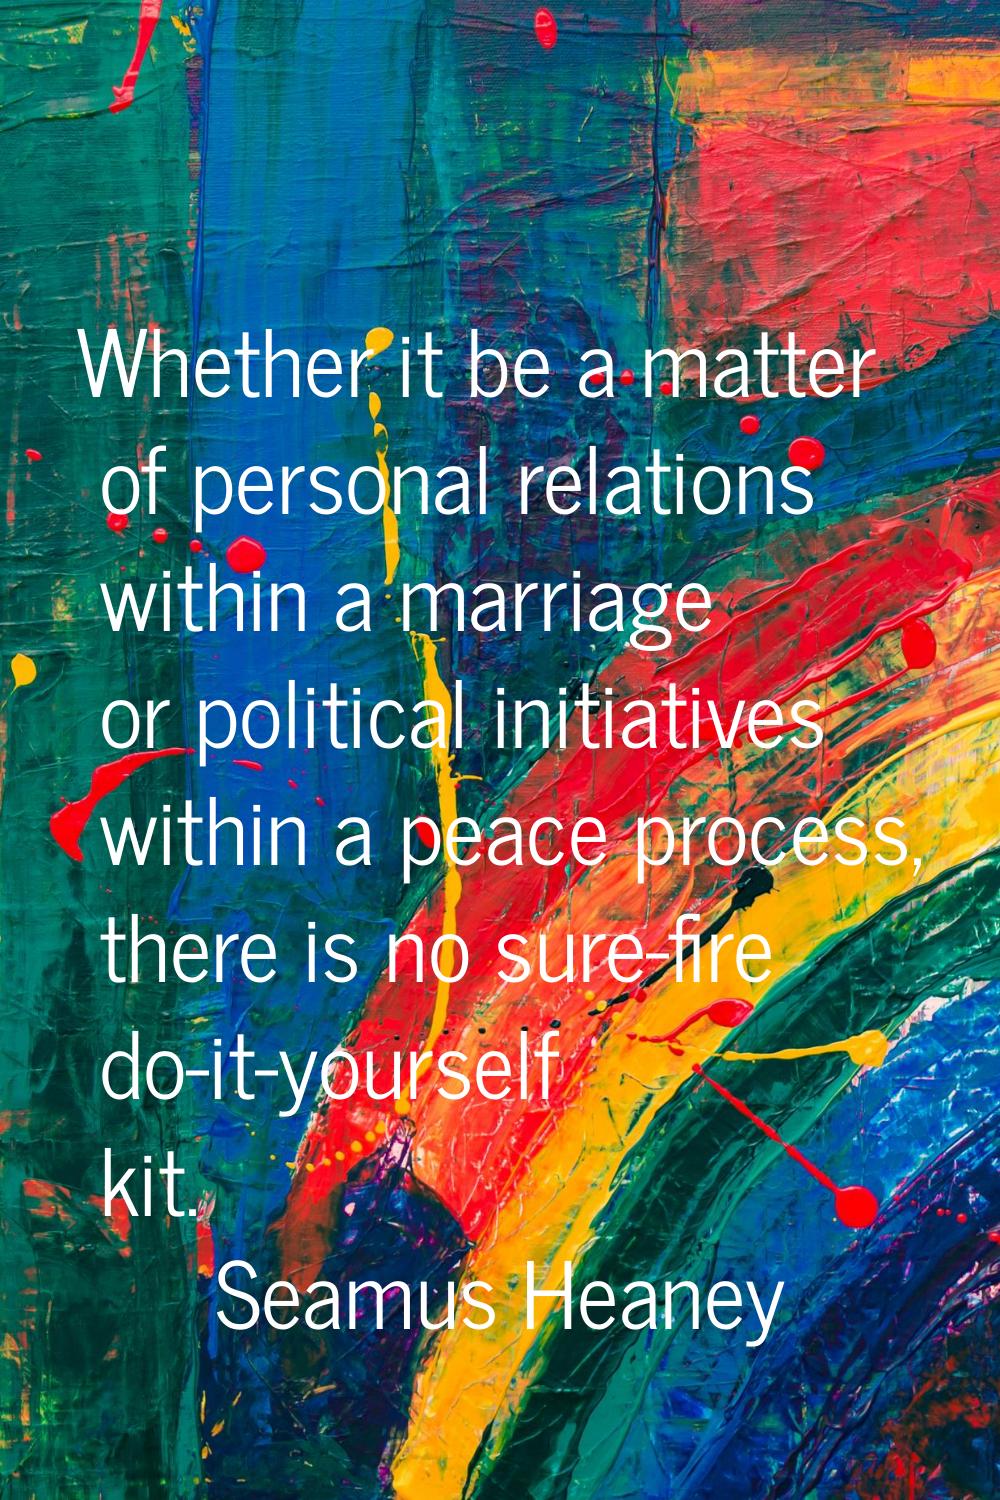 Whether it be a matter of personal relations within a marriage or political initiatives within a pe